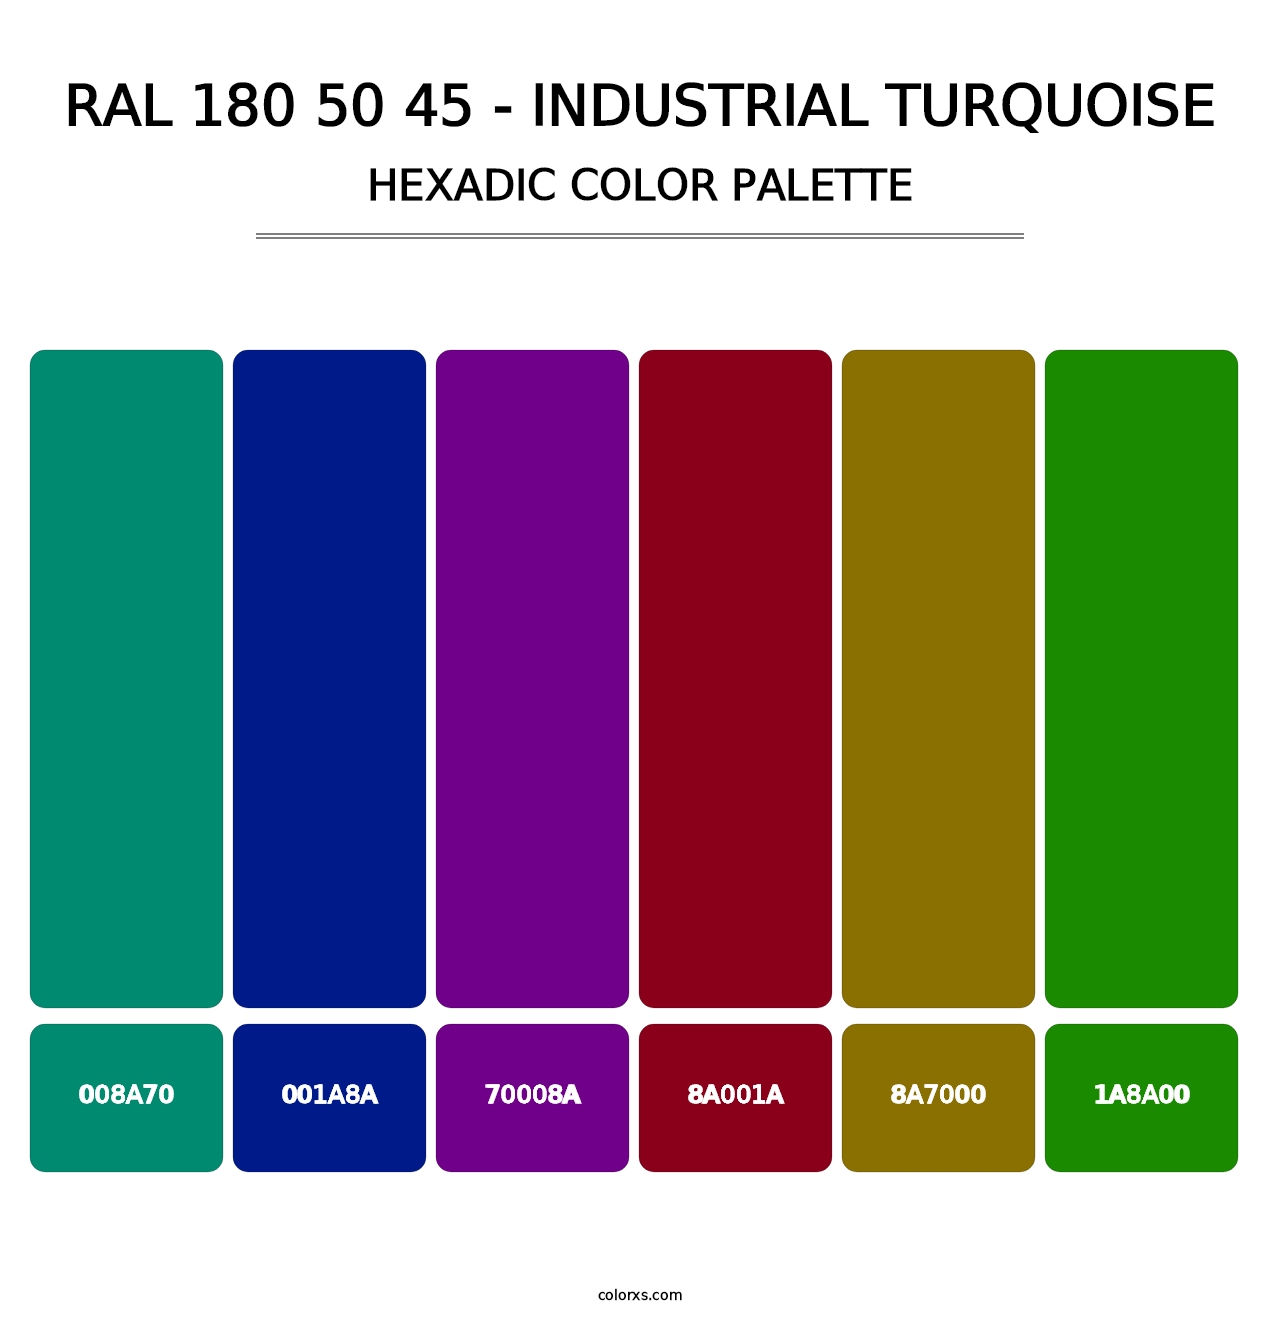 RAL 180 50 45 - Industrial Turquoise - Hexadic Color Palette